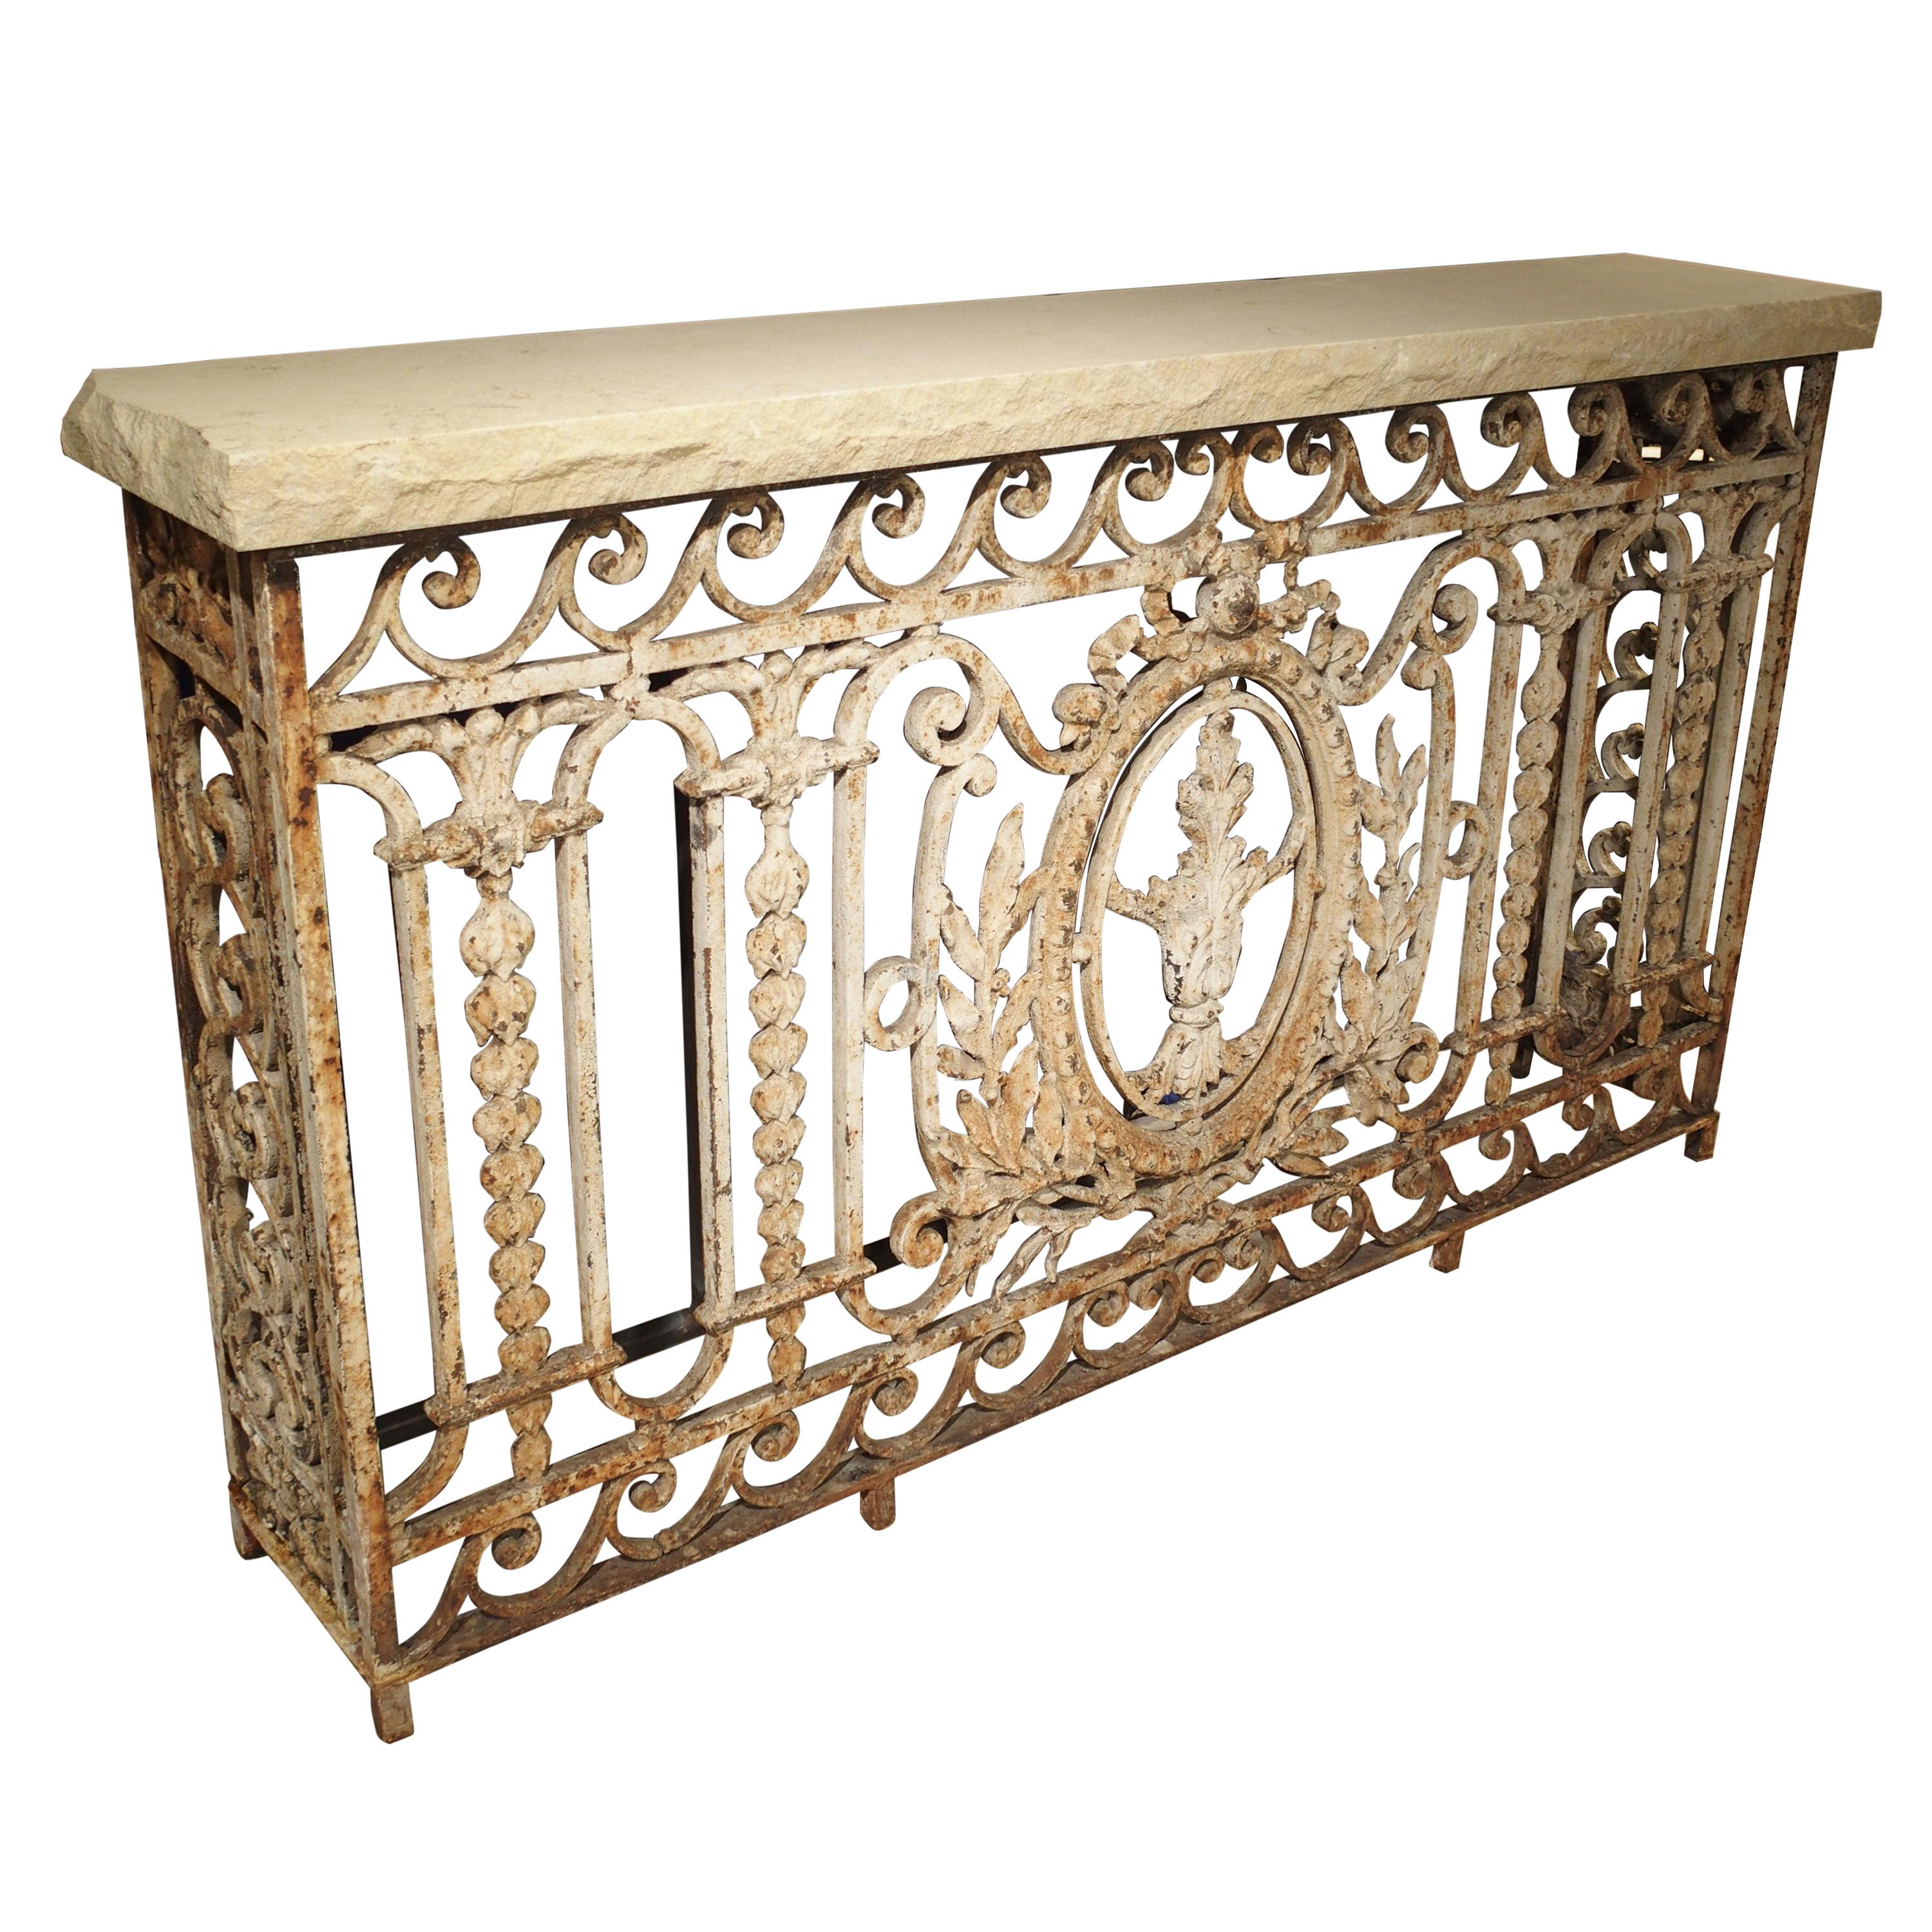 Antique Painted Wrought Iron Balcony Gate Console with Limestone Top